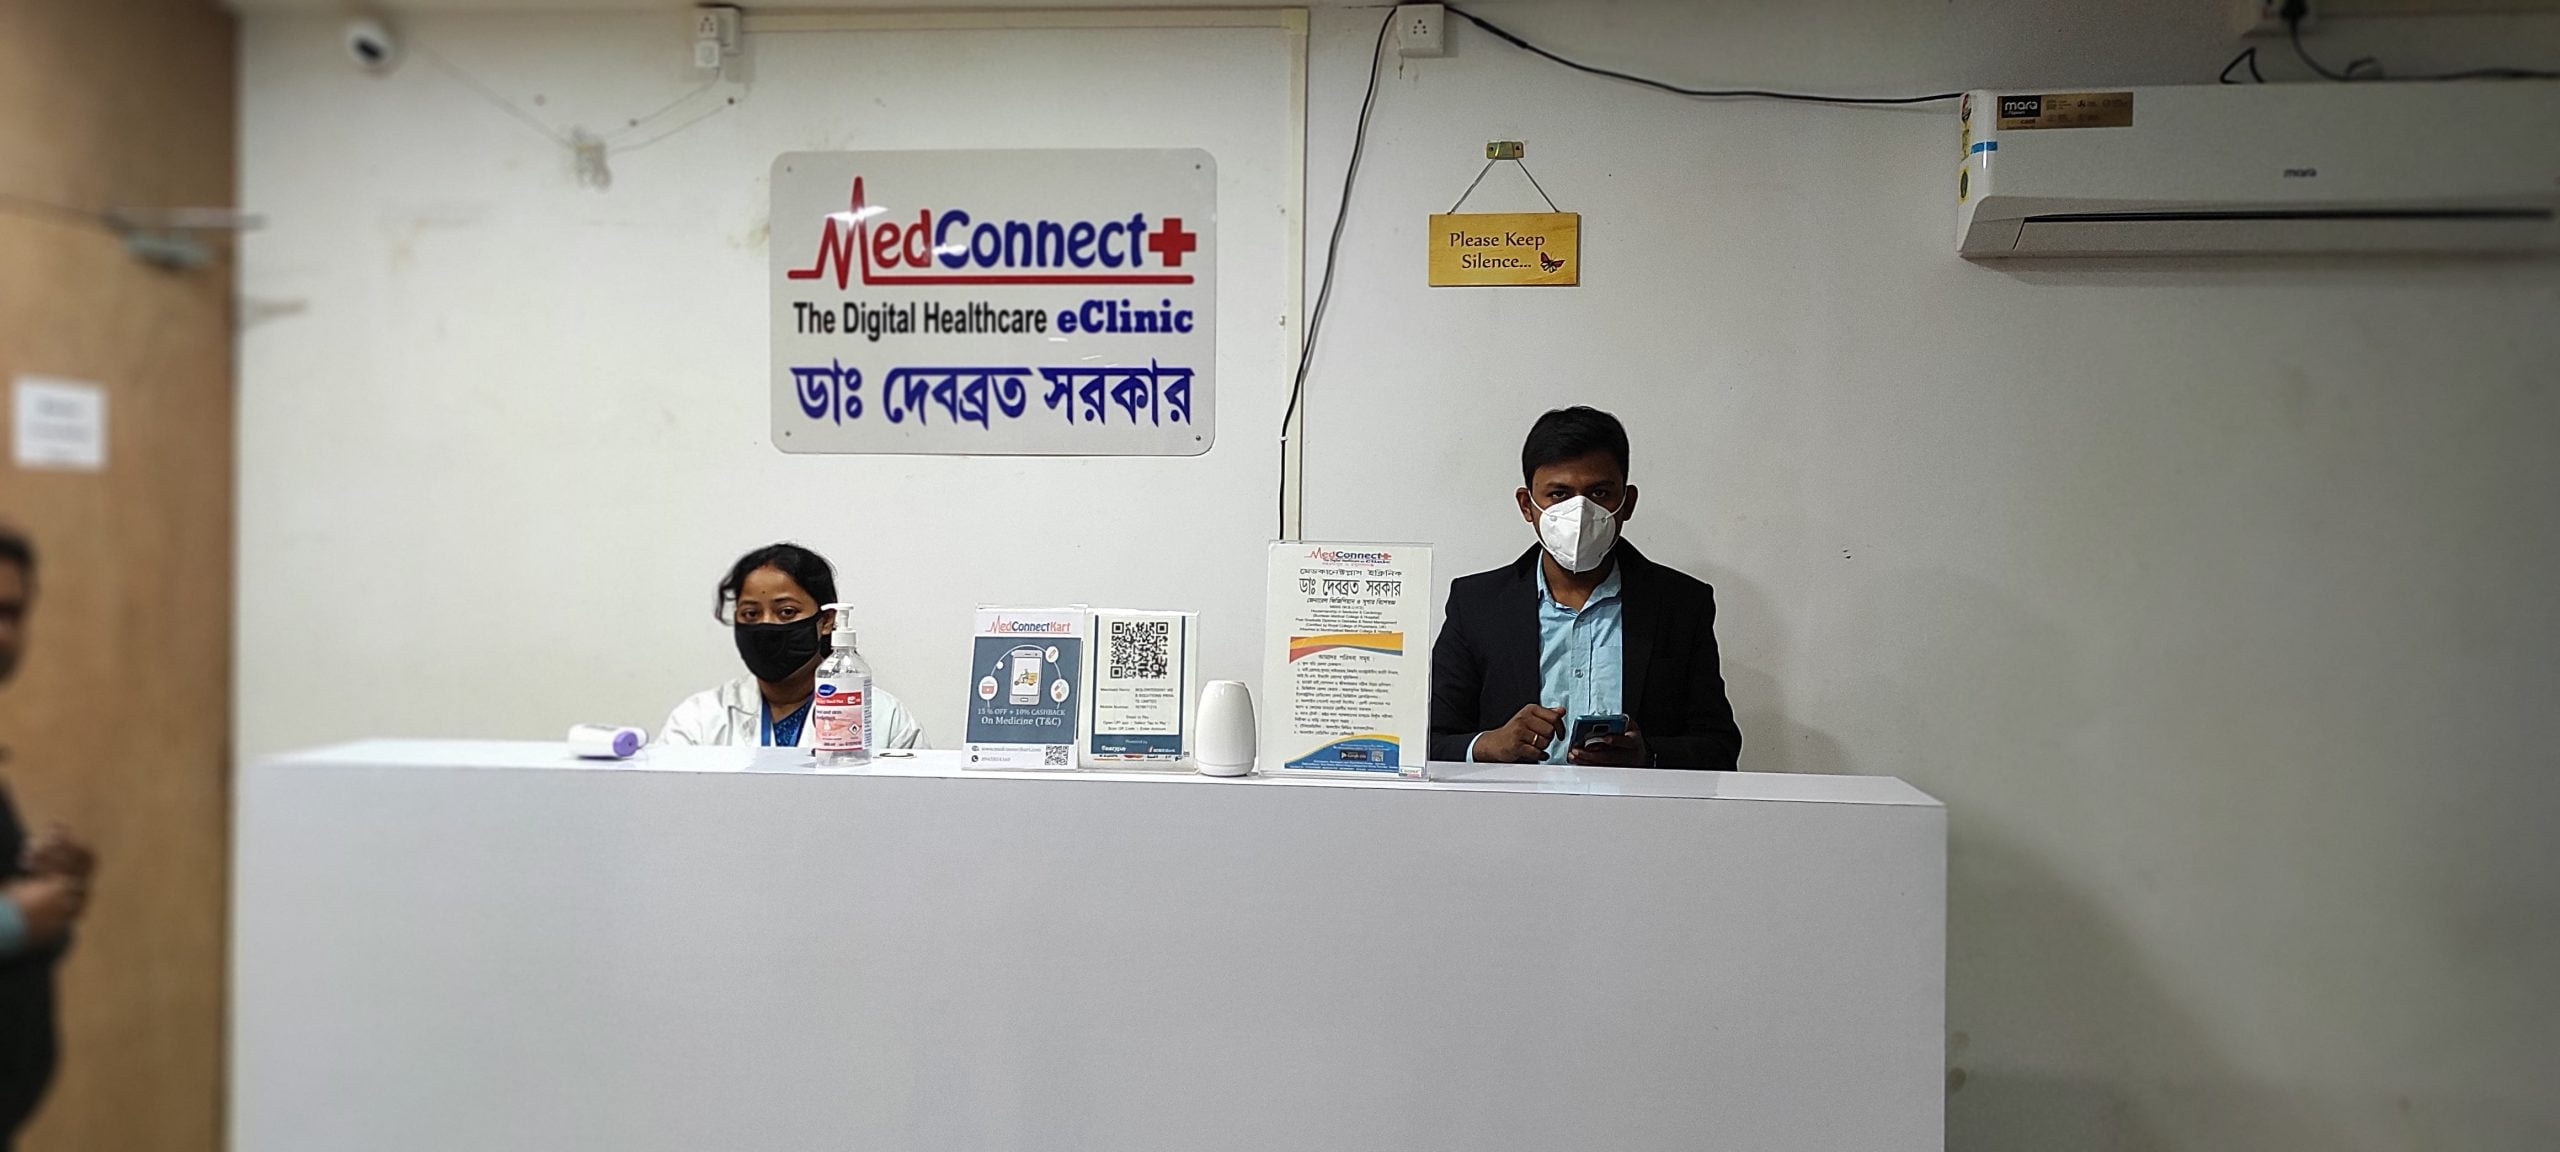 MedConnectPlus eClinic - Physician and Diabetes Clinic